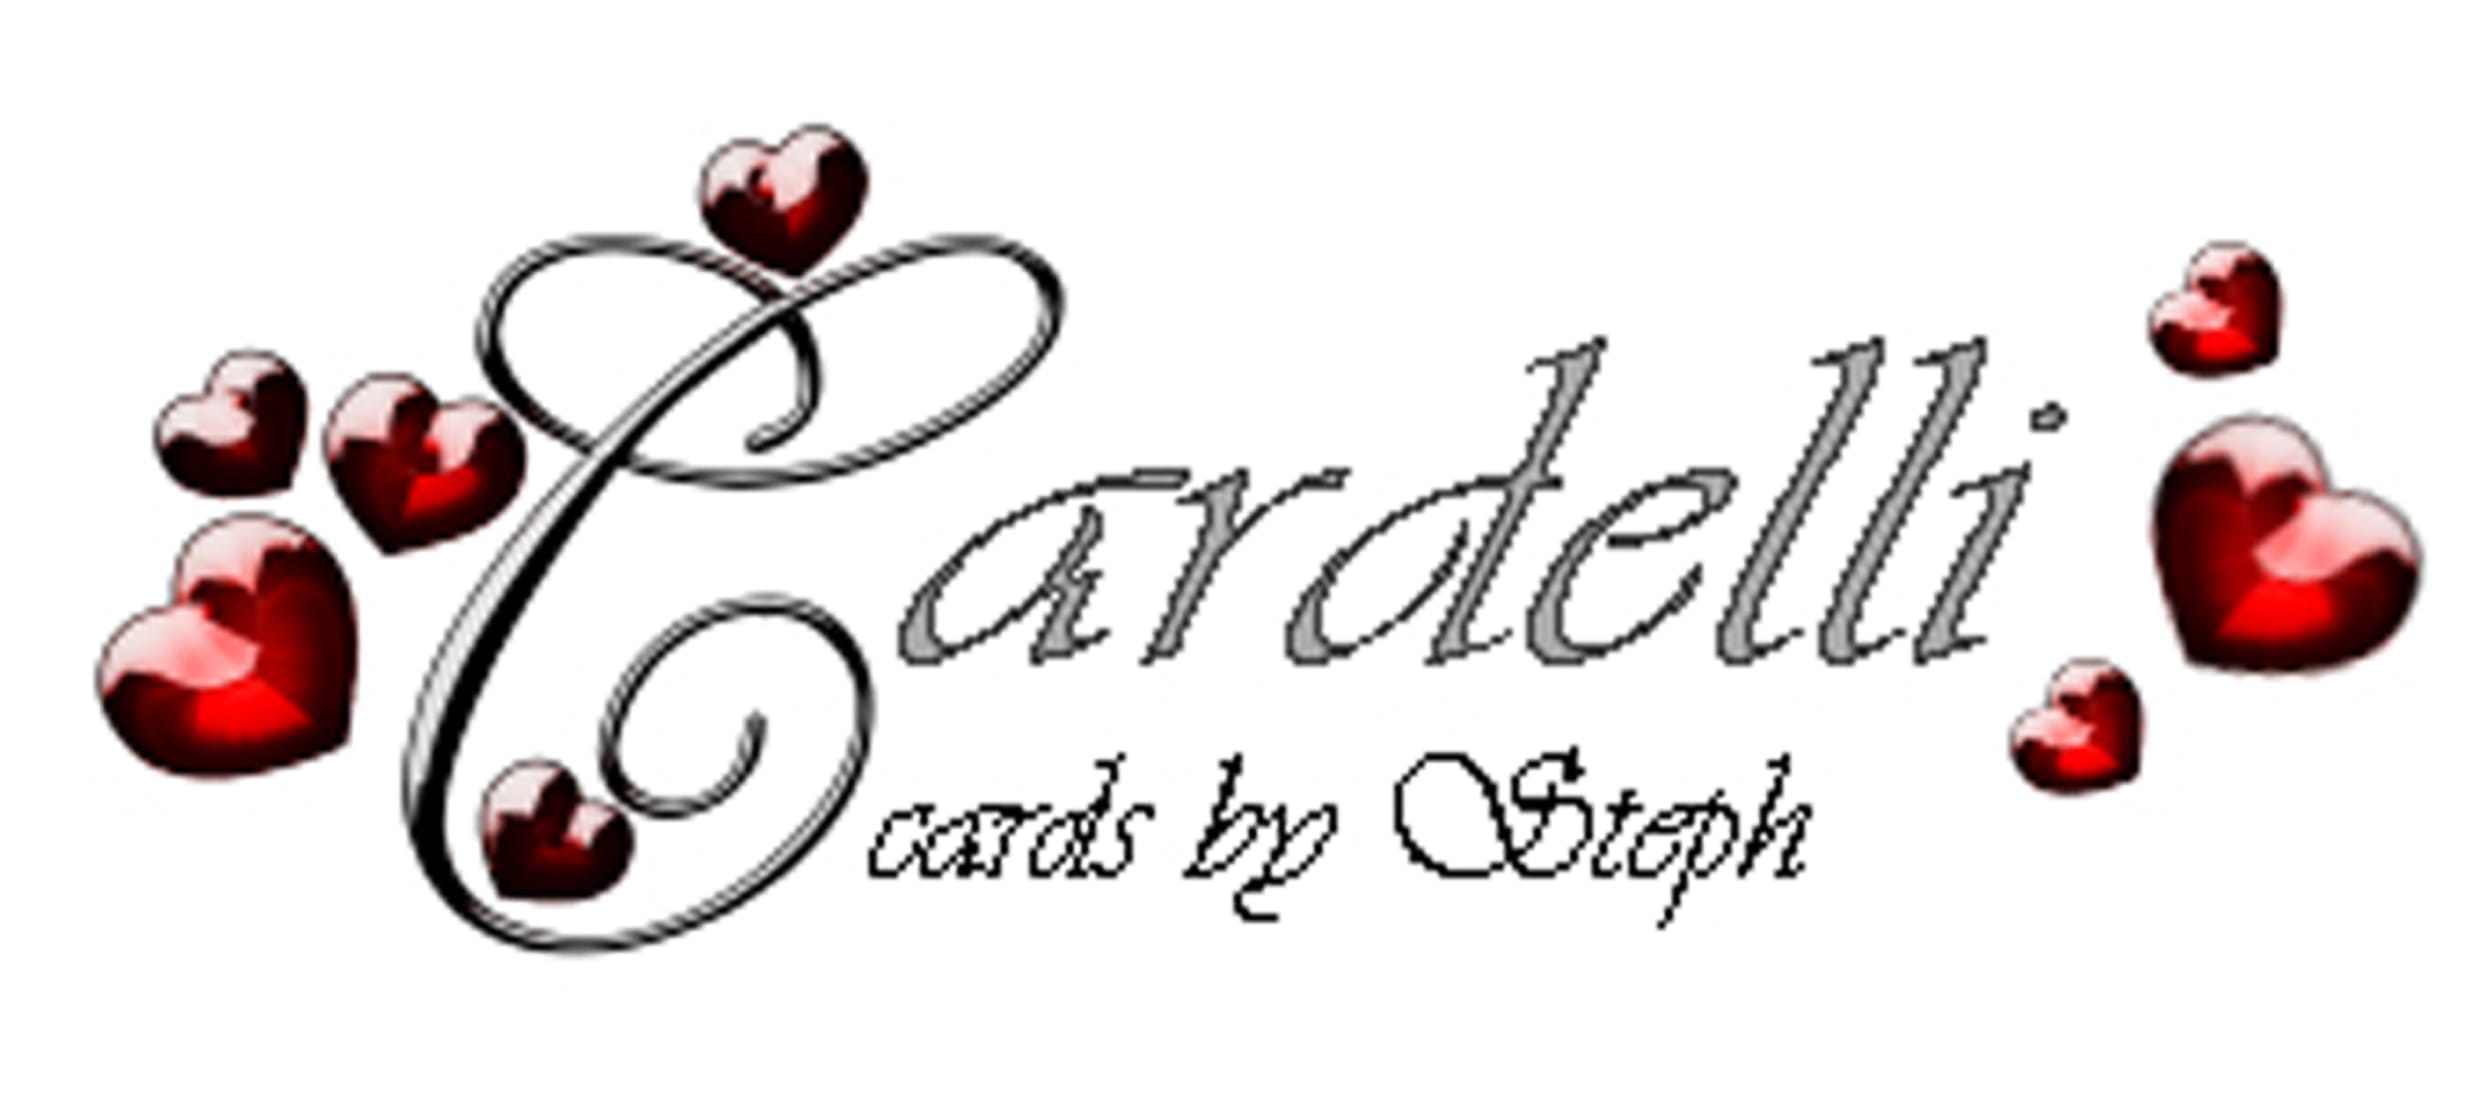 Cardelli. Cards by Stef